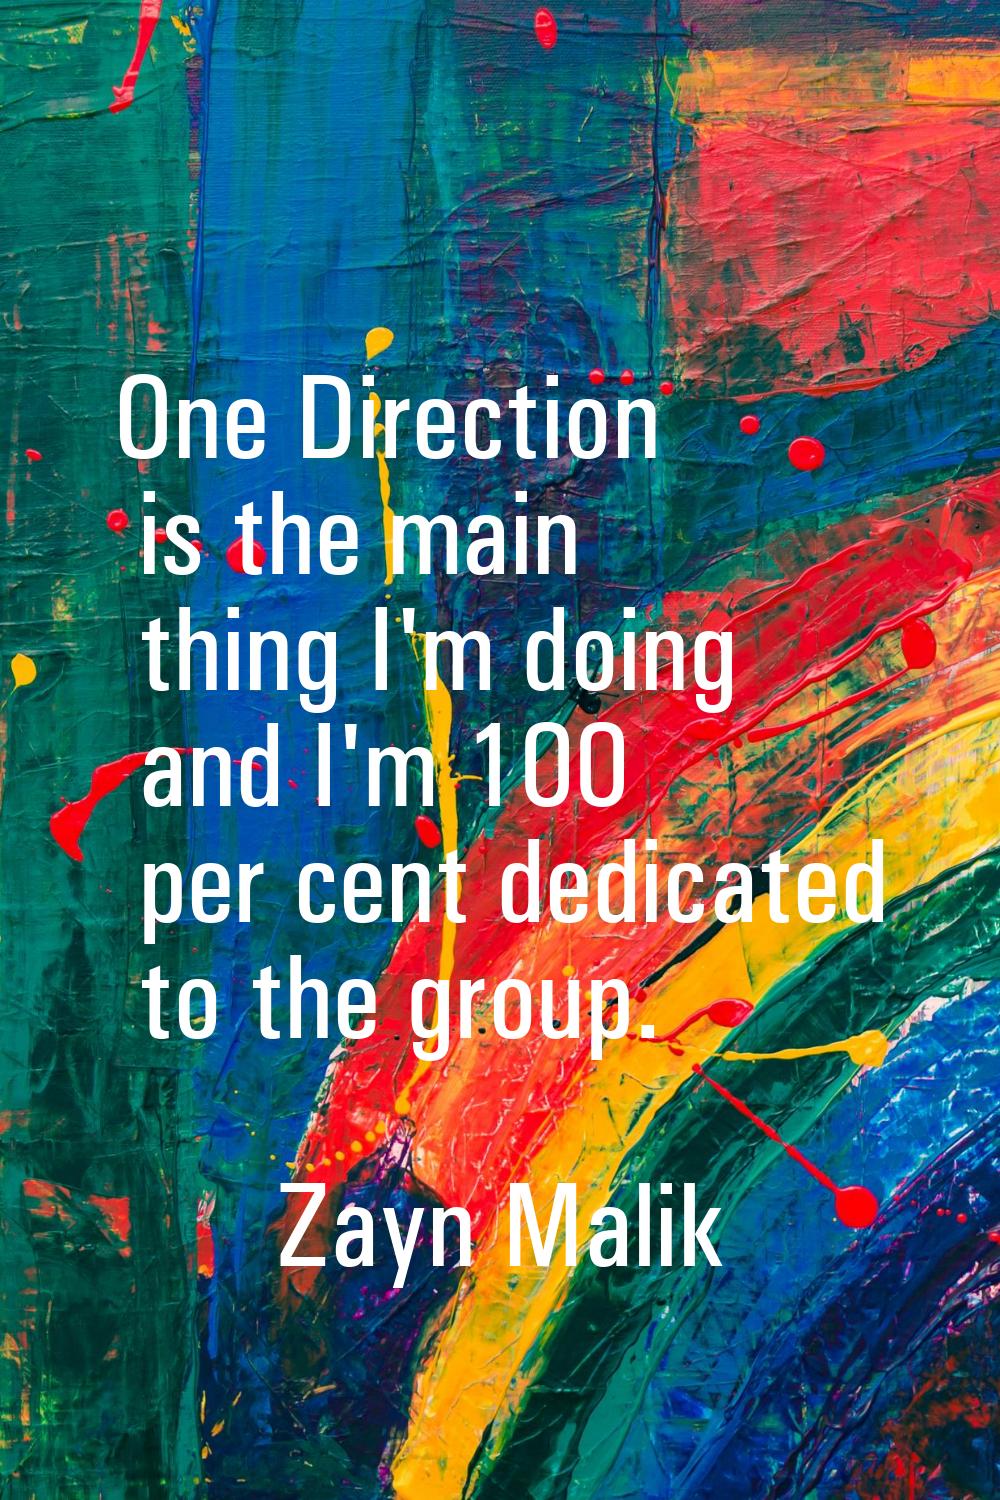 One Direction is the main thing I'm doing and I'm 100 per cent dedicated to the group.